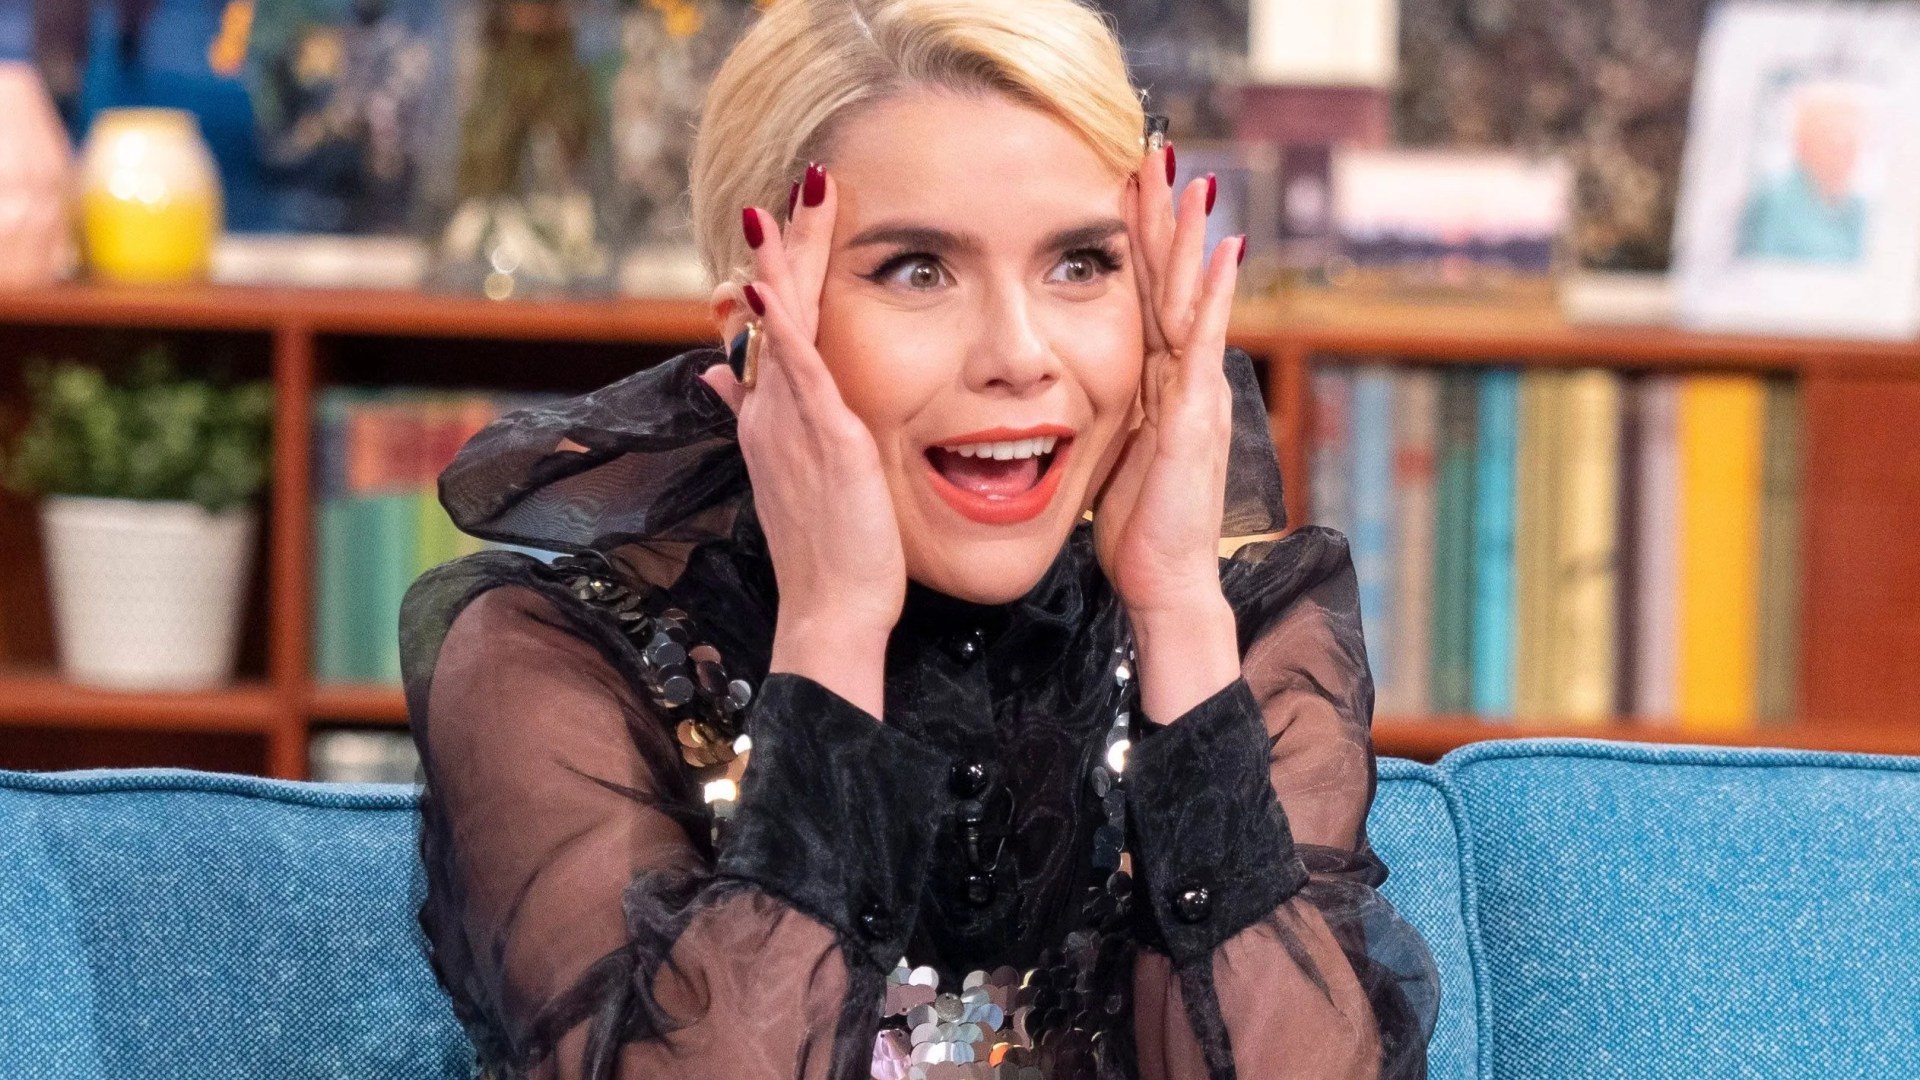 Devastated Paloma Faith cancels gig last minute due to sudden illness – fans left disappointed